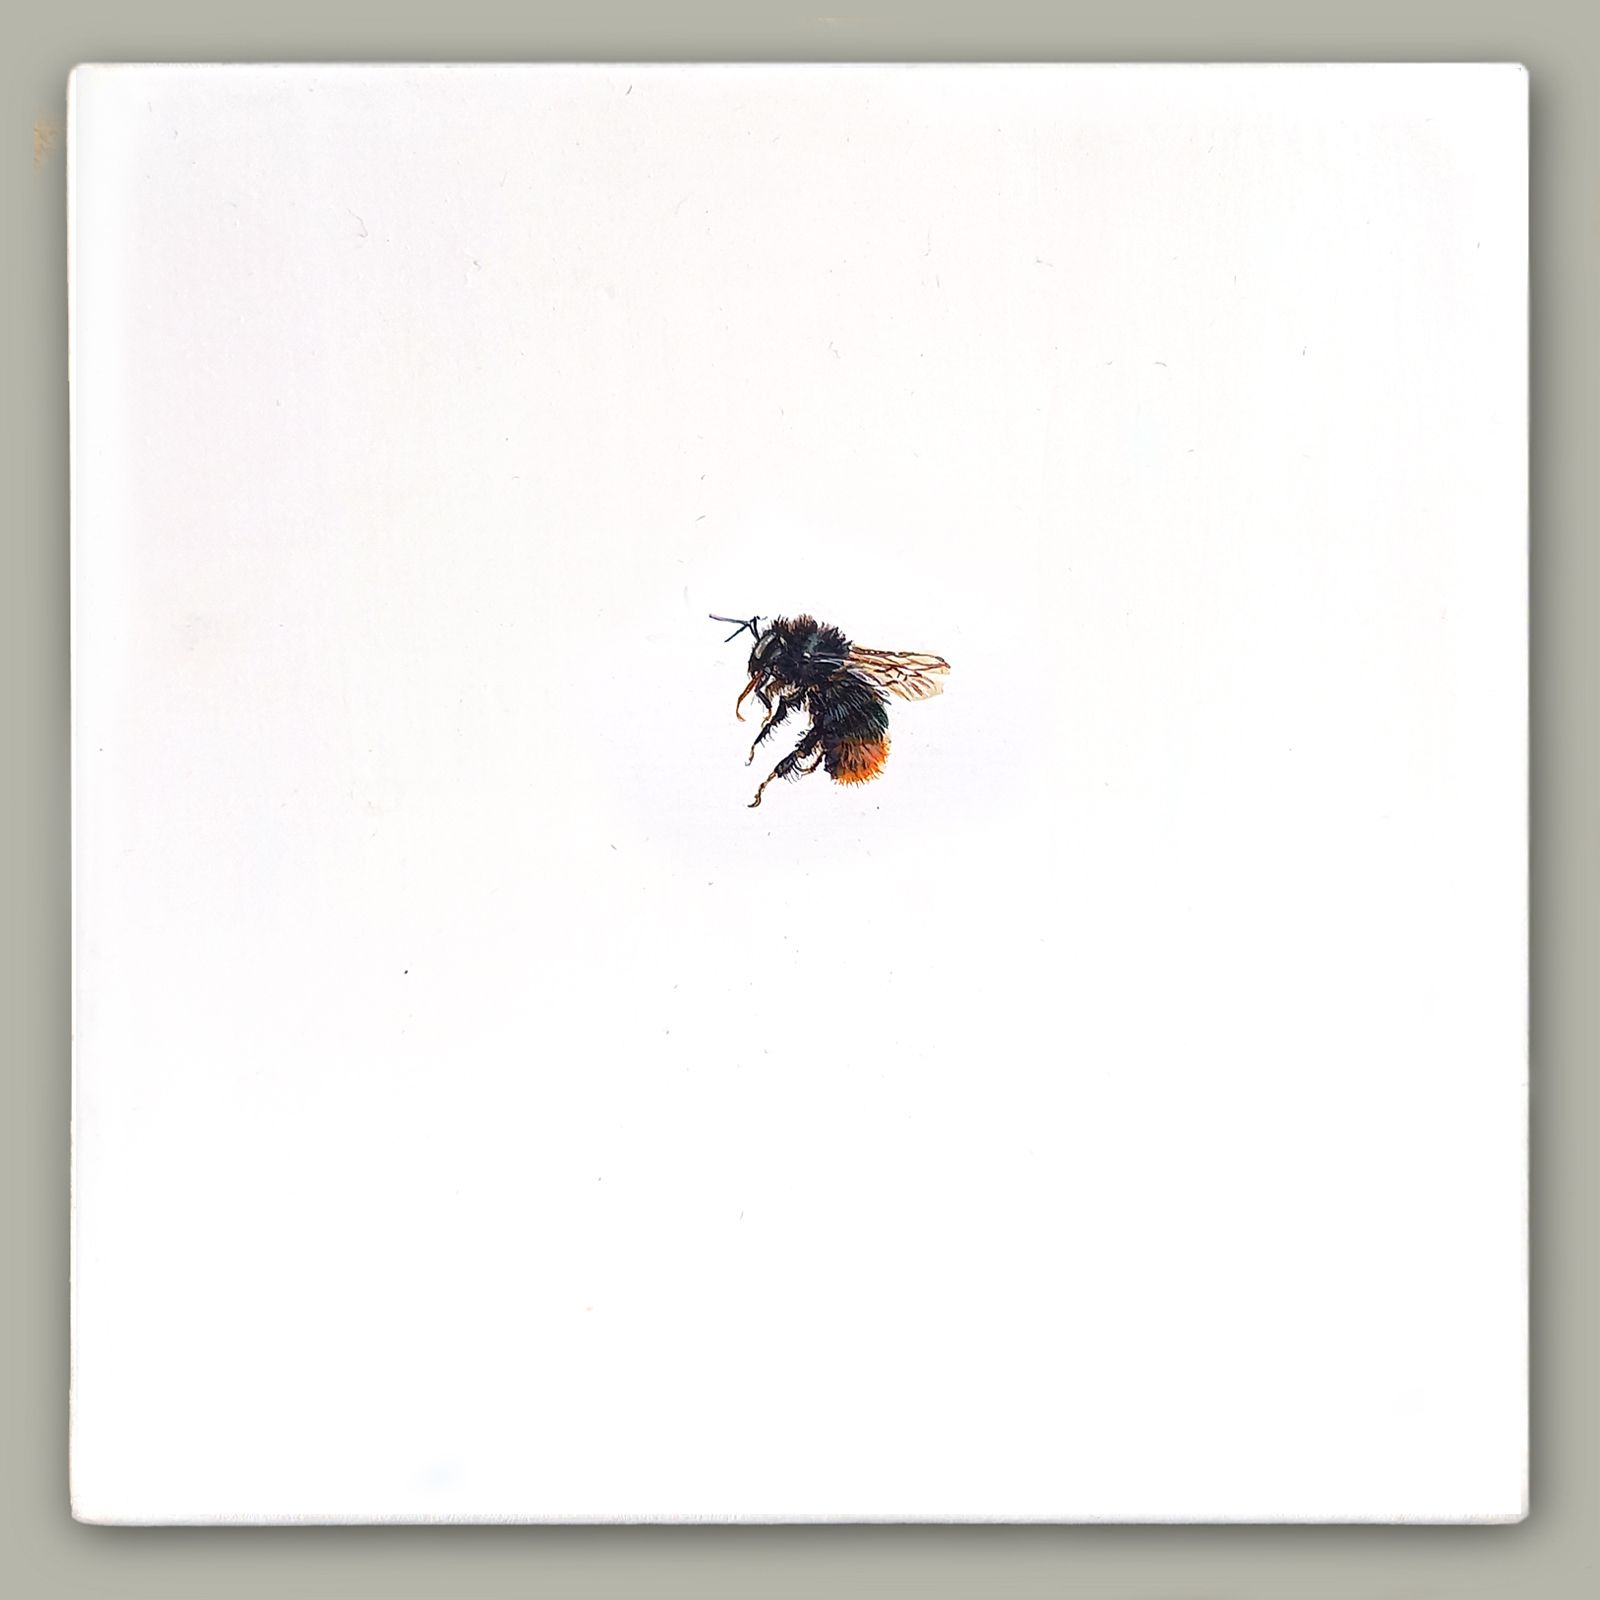  - One Bee Left: Red-tailed Bumblebee